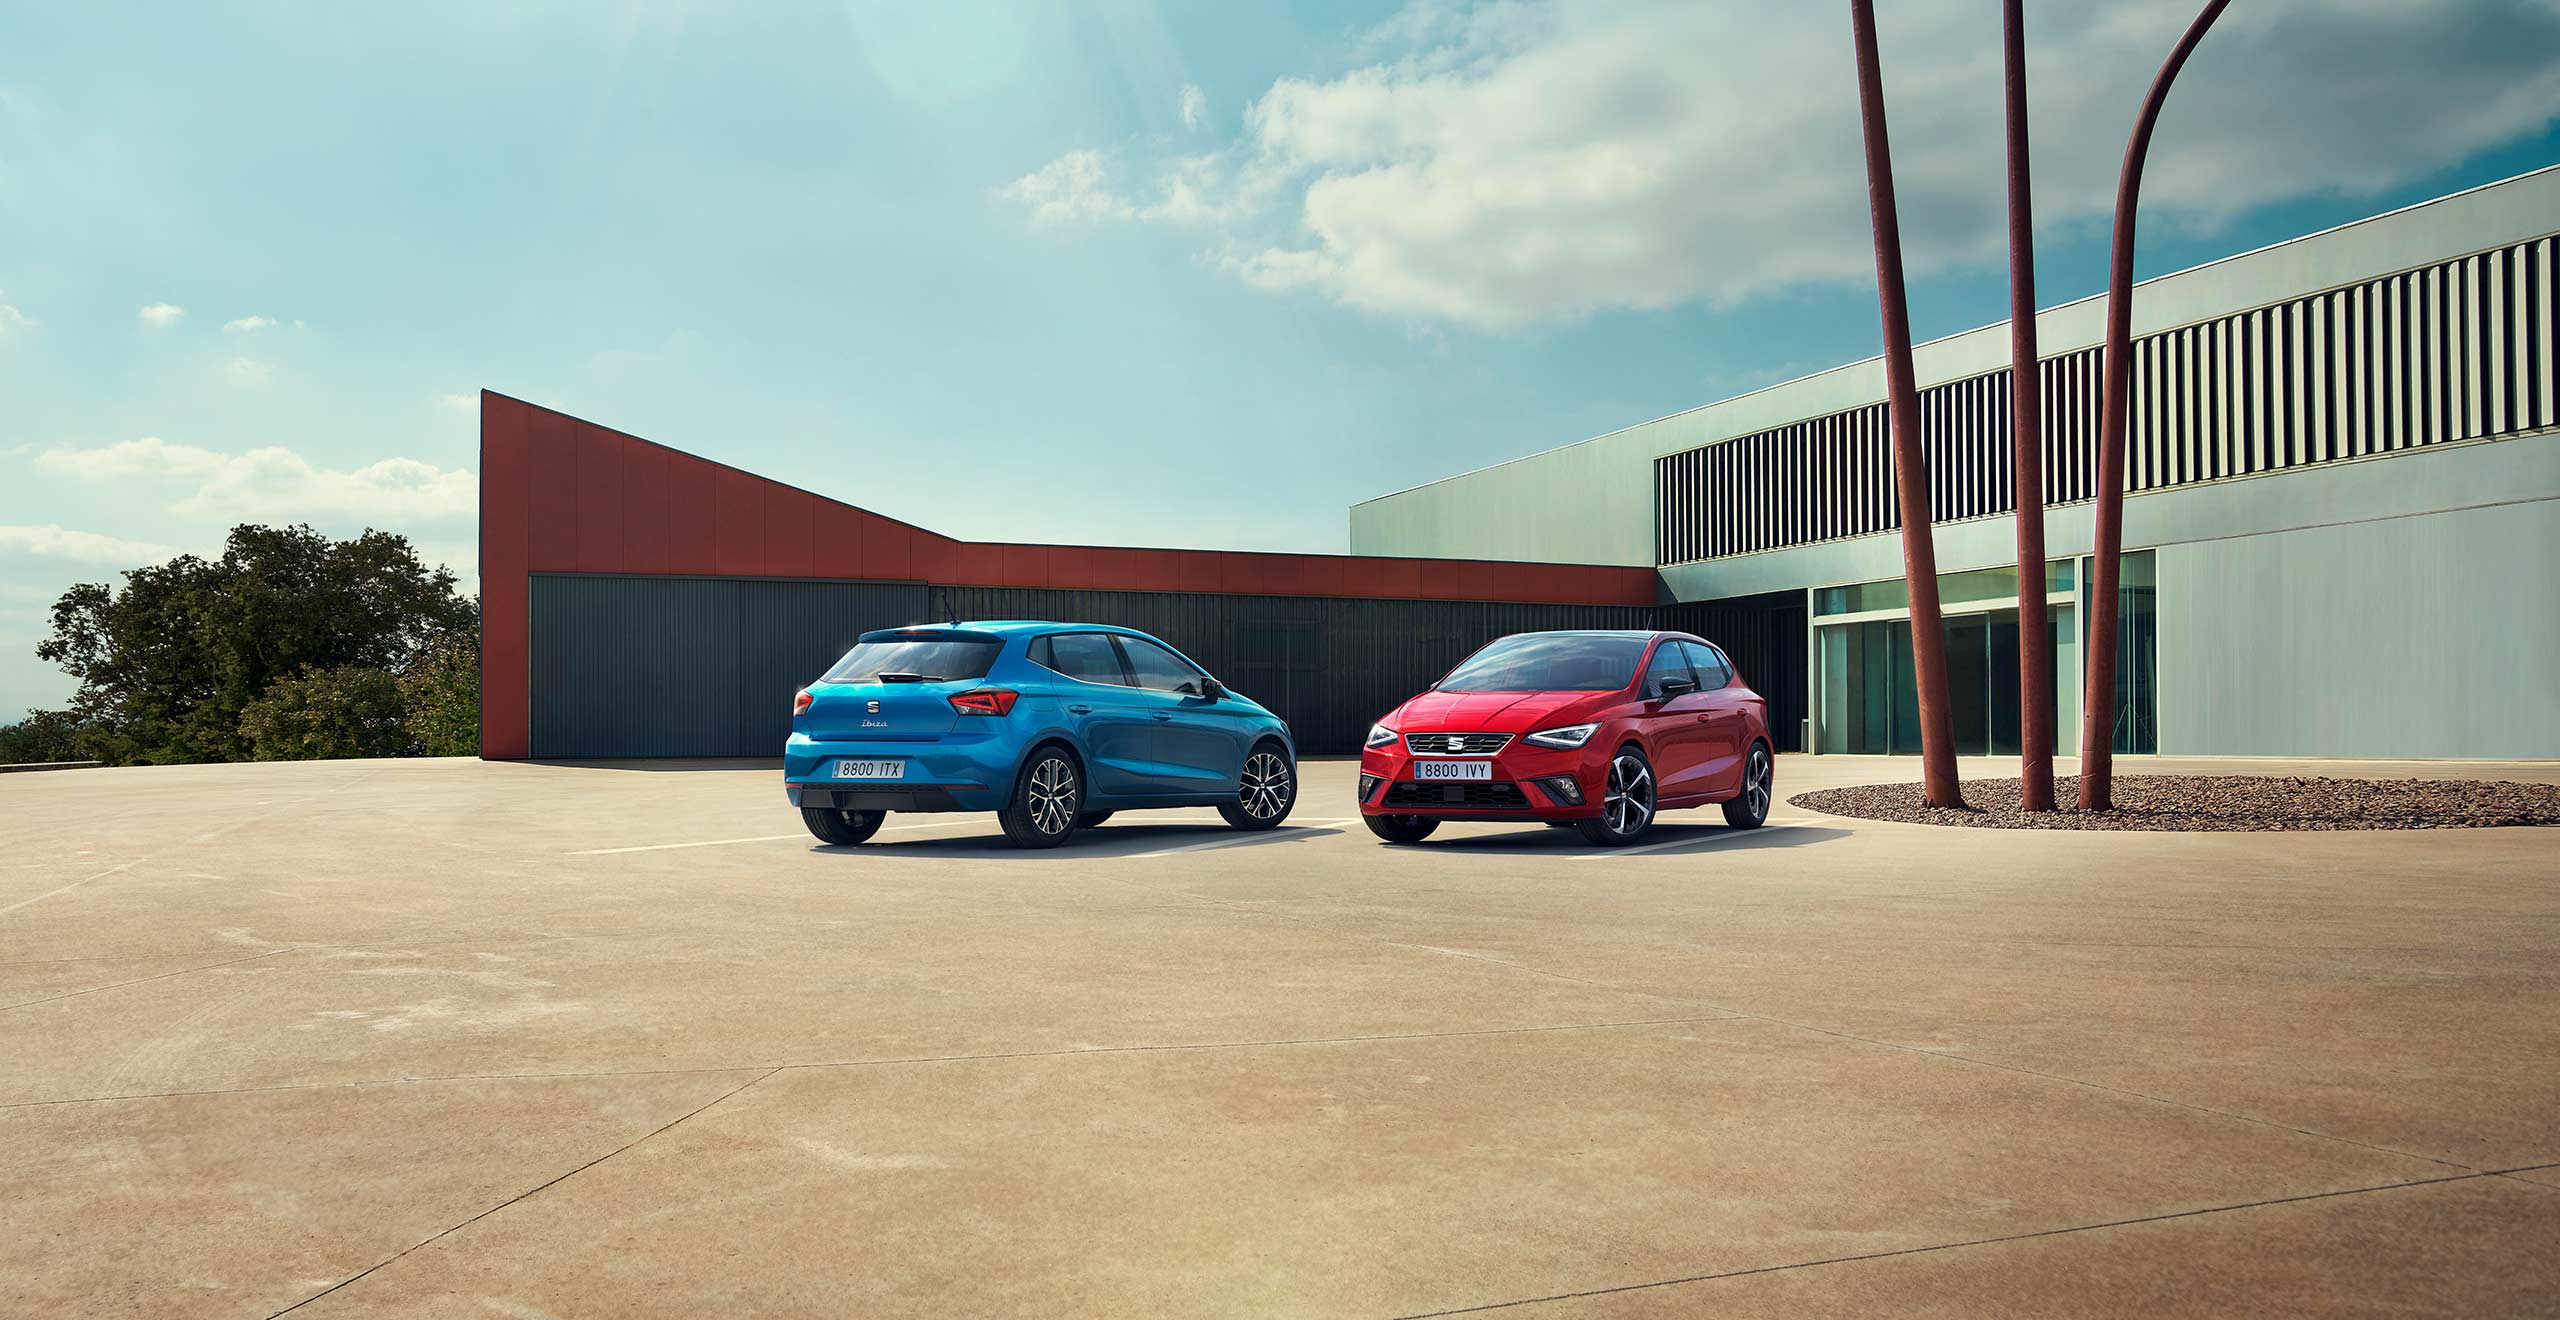 Two SEAT Ibiza parked, one Sapphire Blue colour and another Desire Red colour.